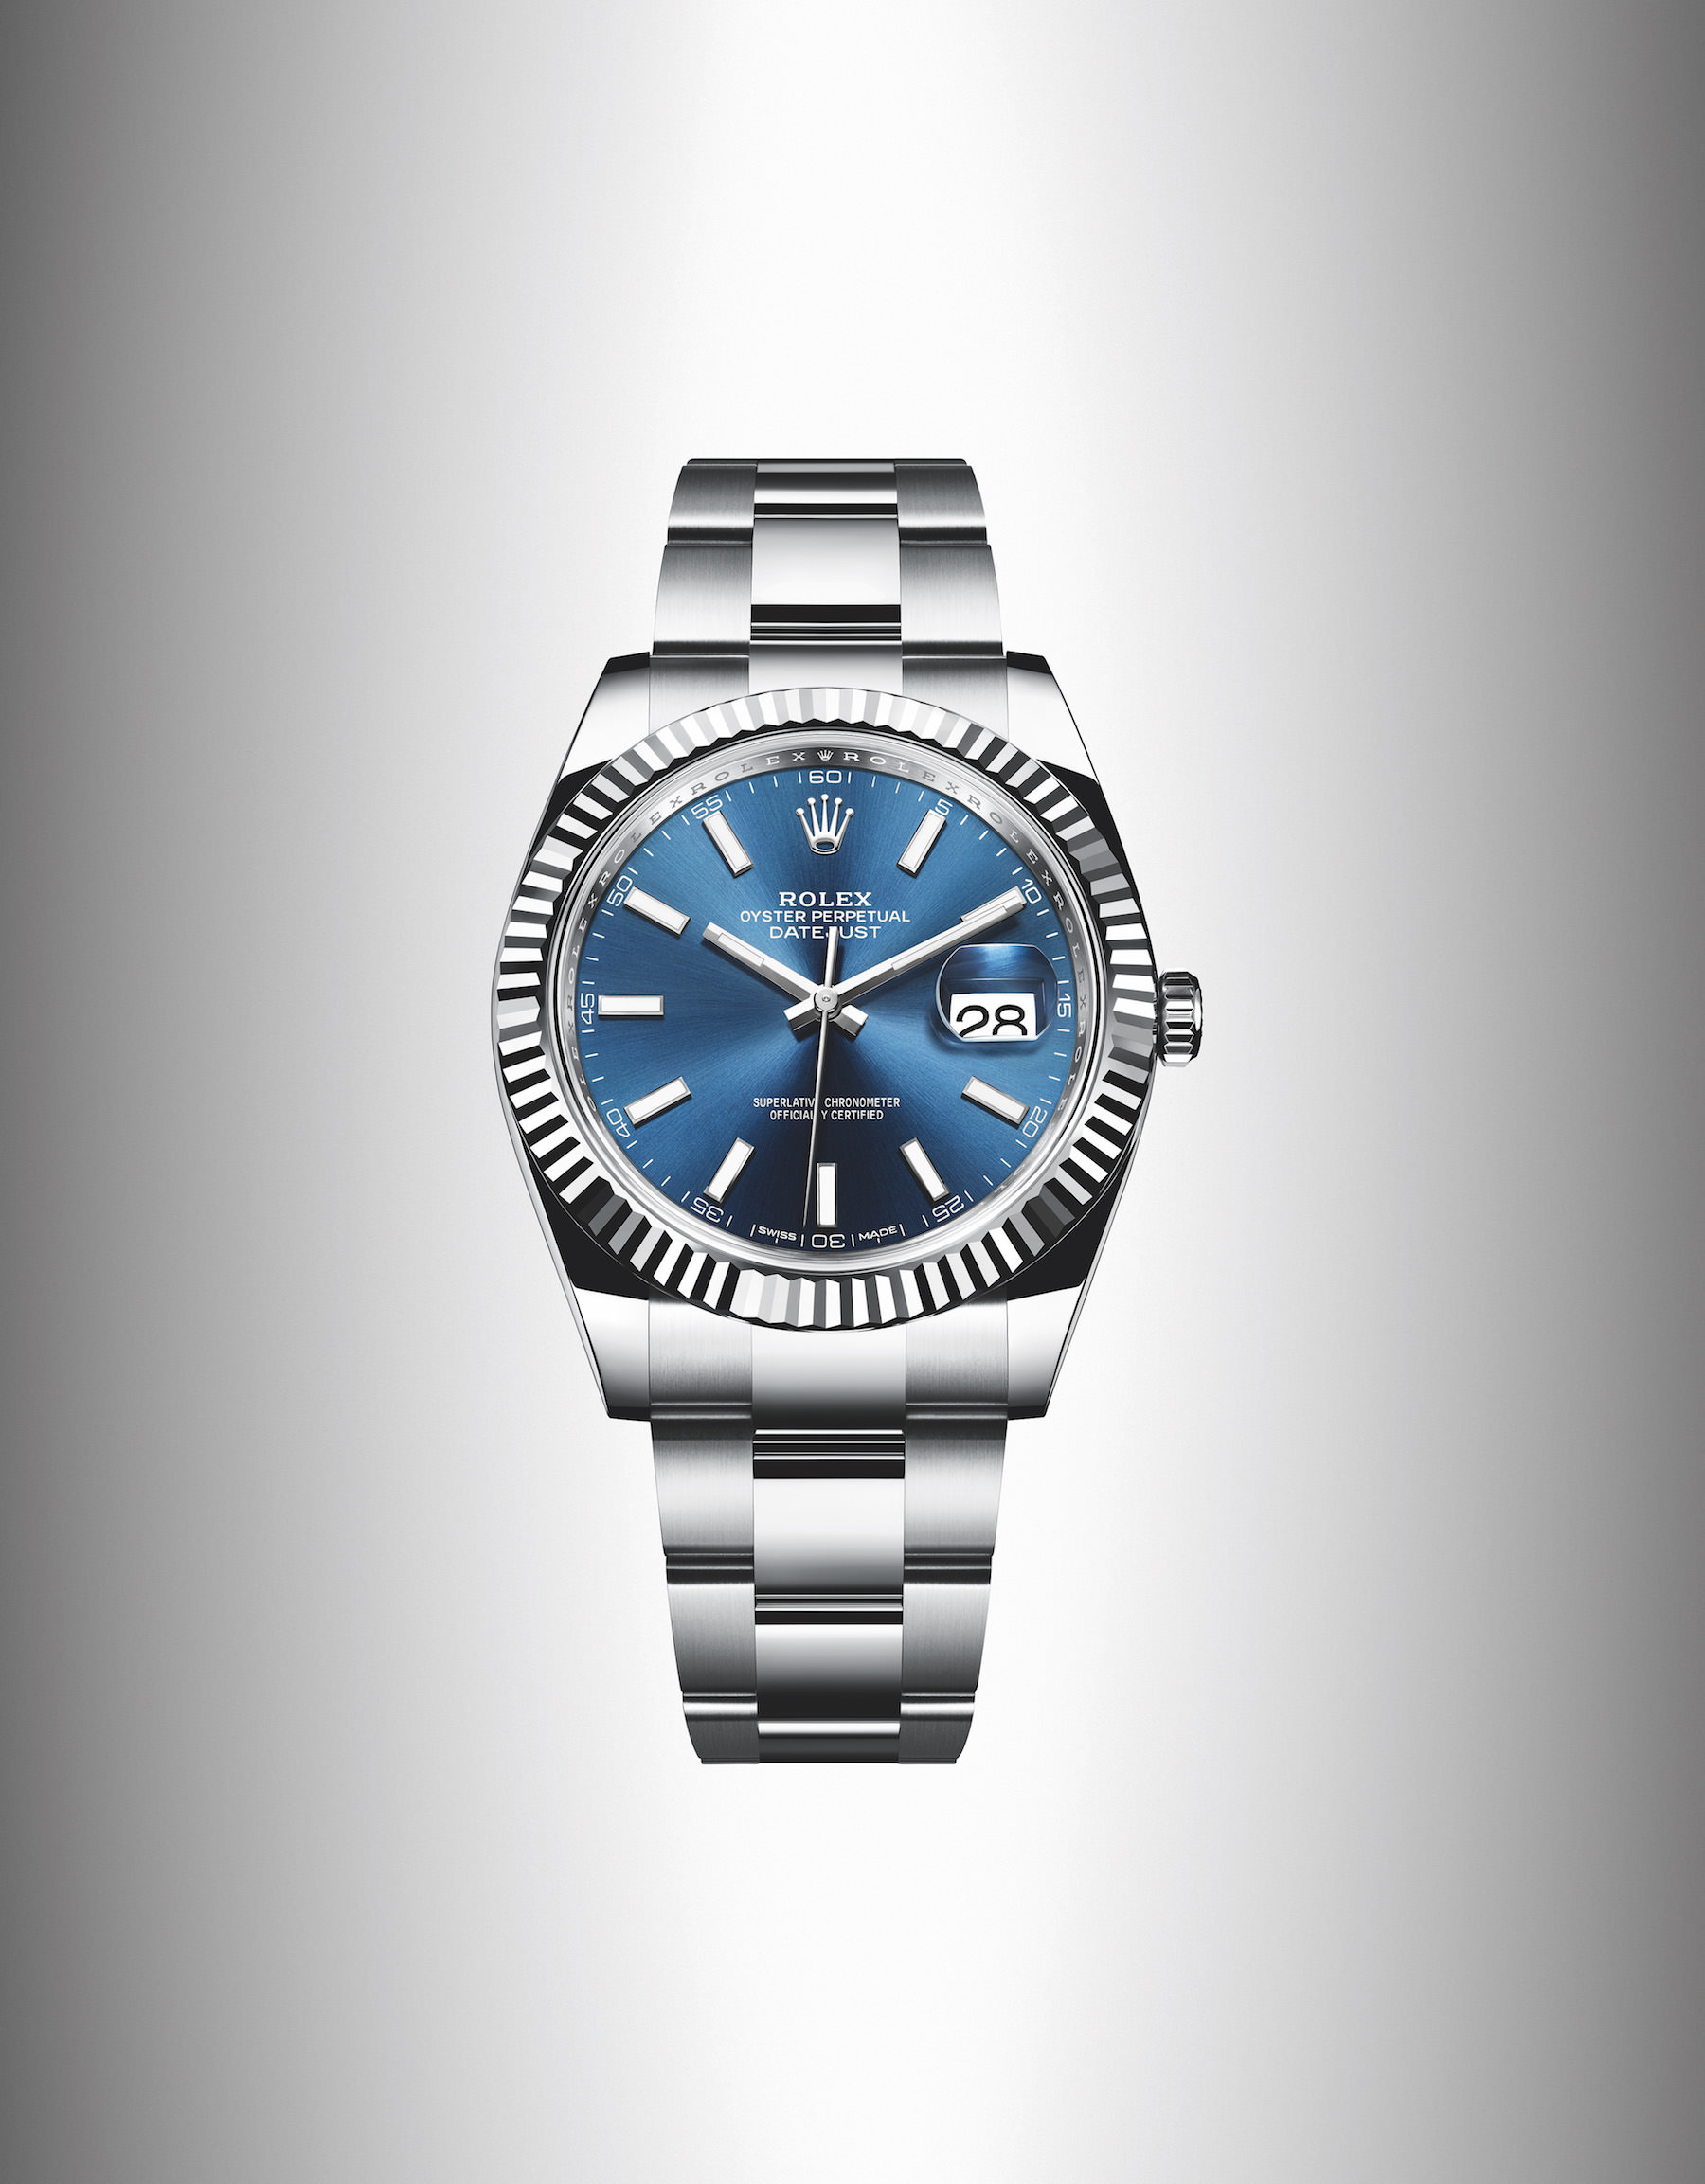 Die Rolex Oyster Perpetual Datejust 41